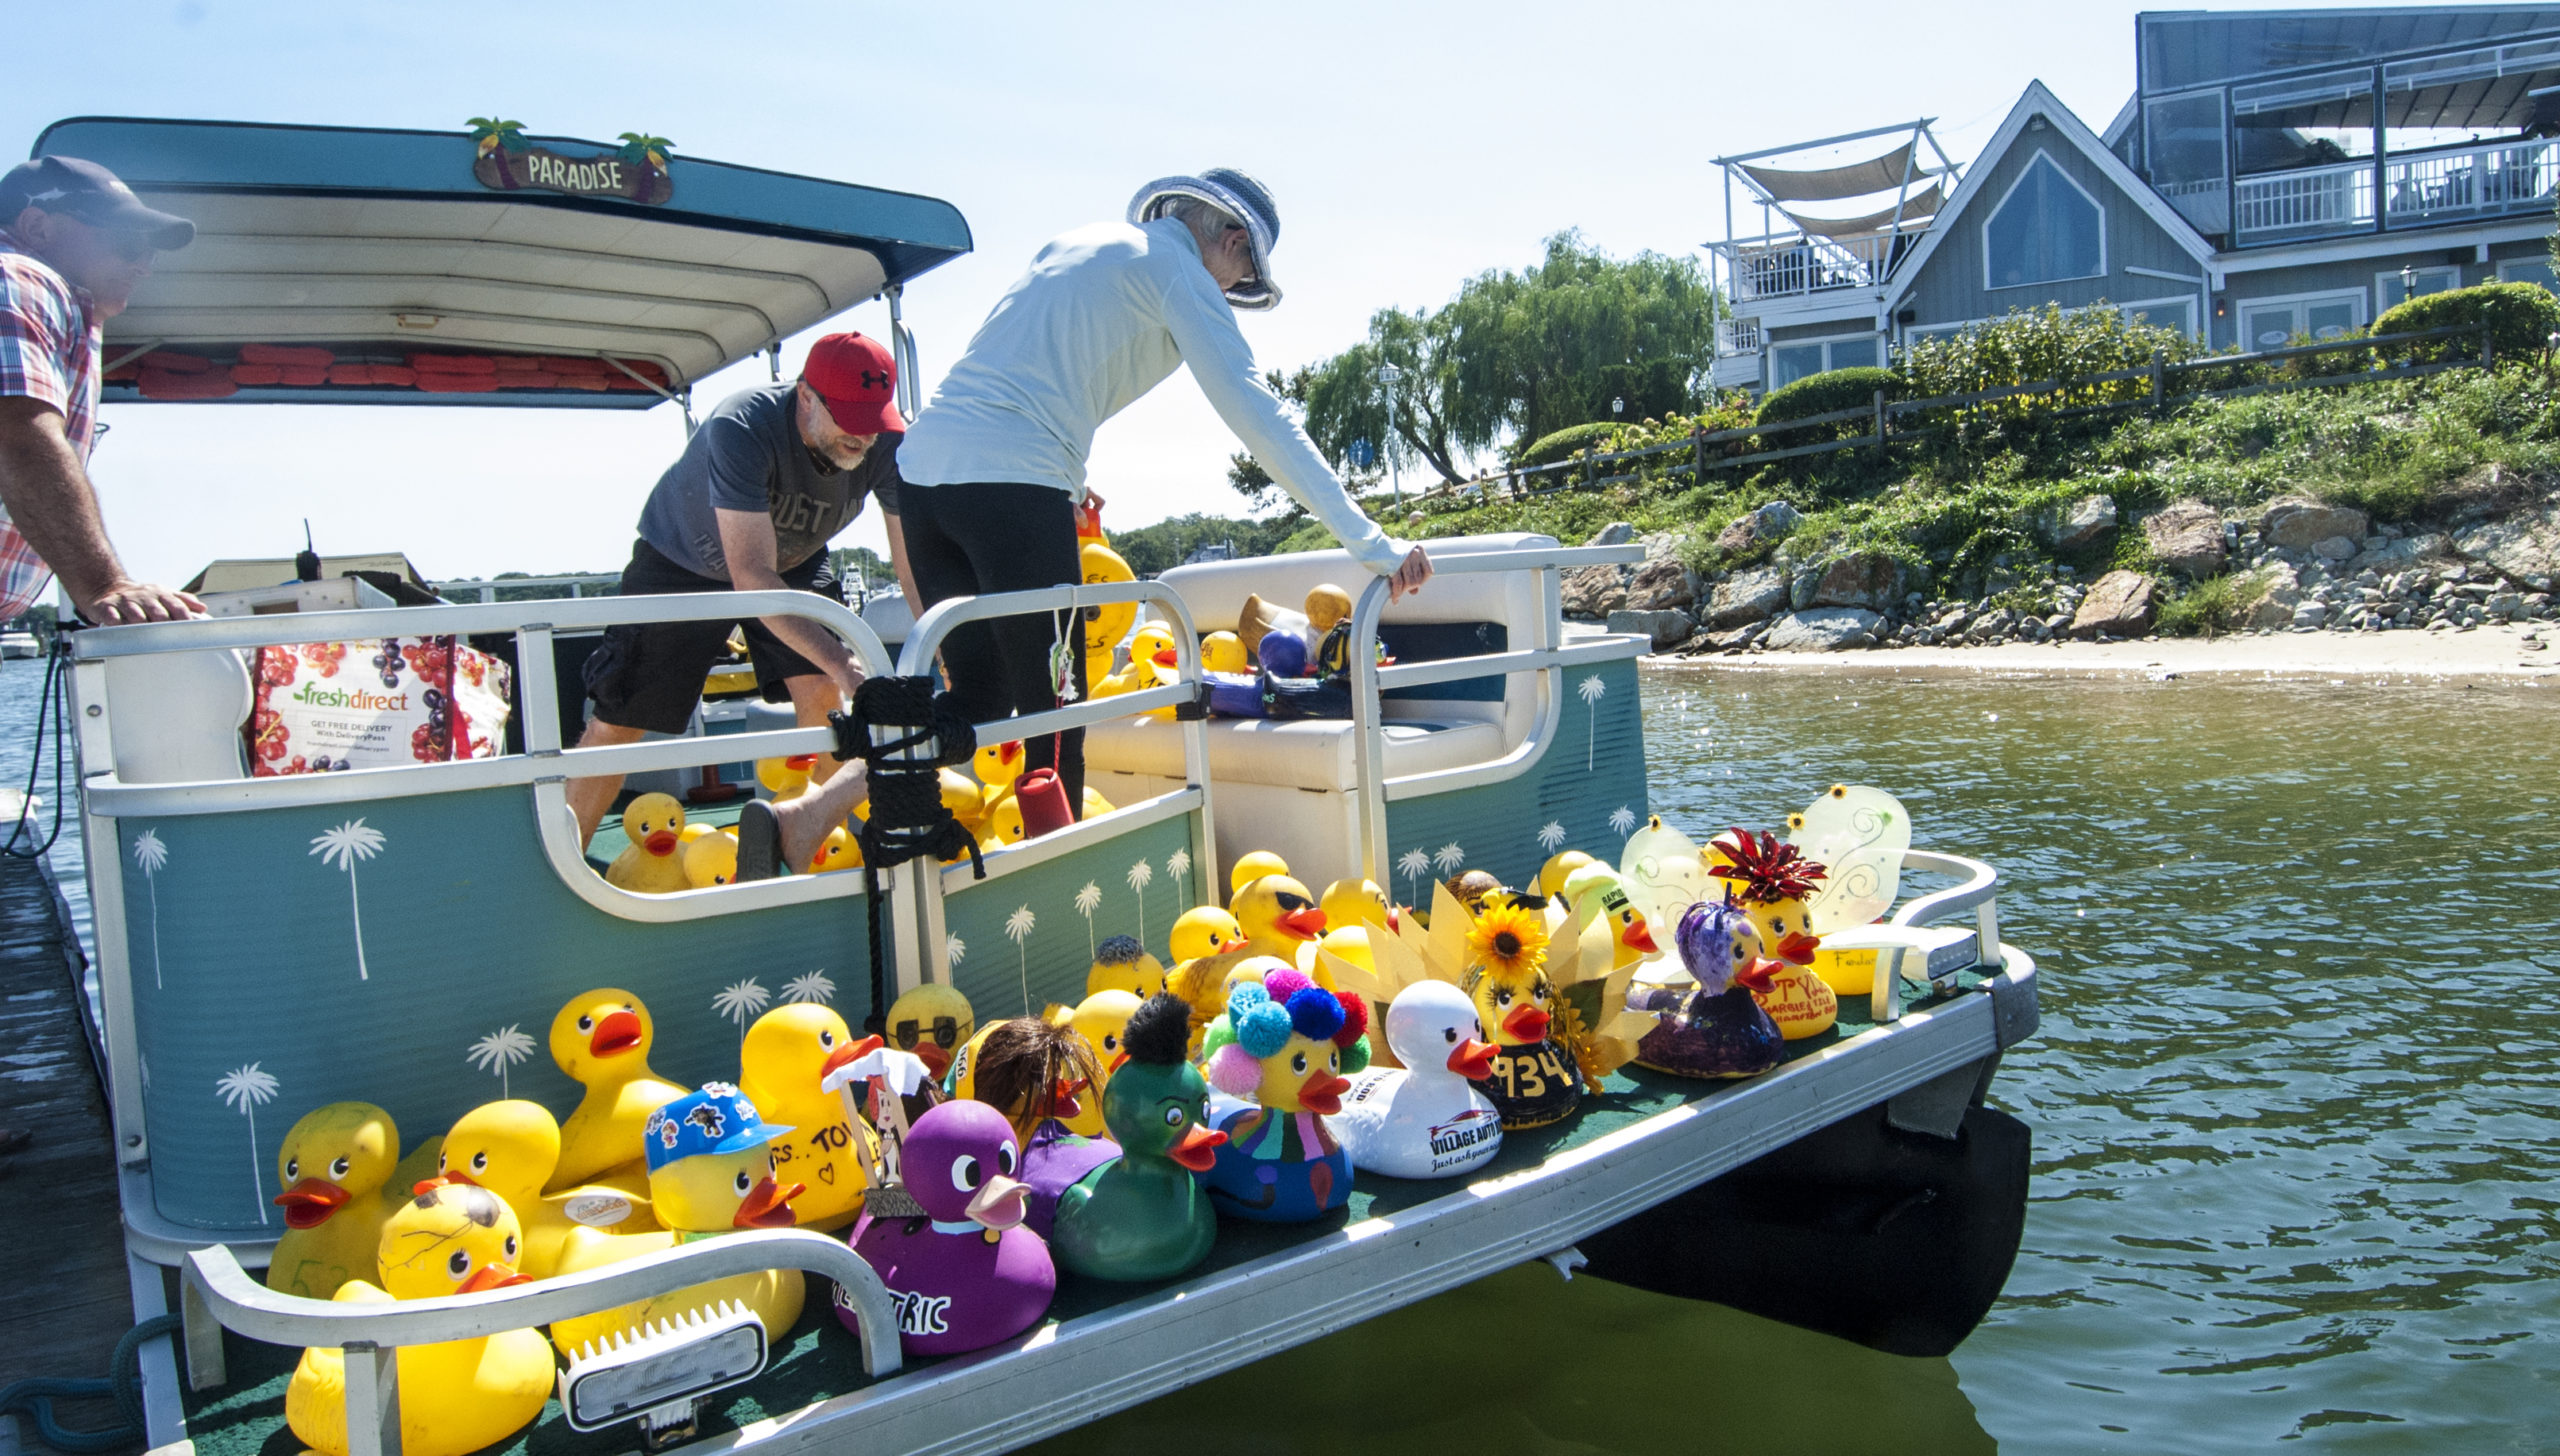 Ducks on deck to race at the Hampton Bays civic Association Rubber Duck Race on Saturday afternoon.  COURTESY HAMPTON BAYS CIVIC ASSOCIATION